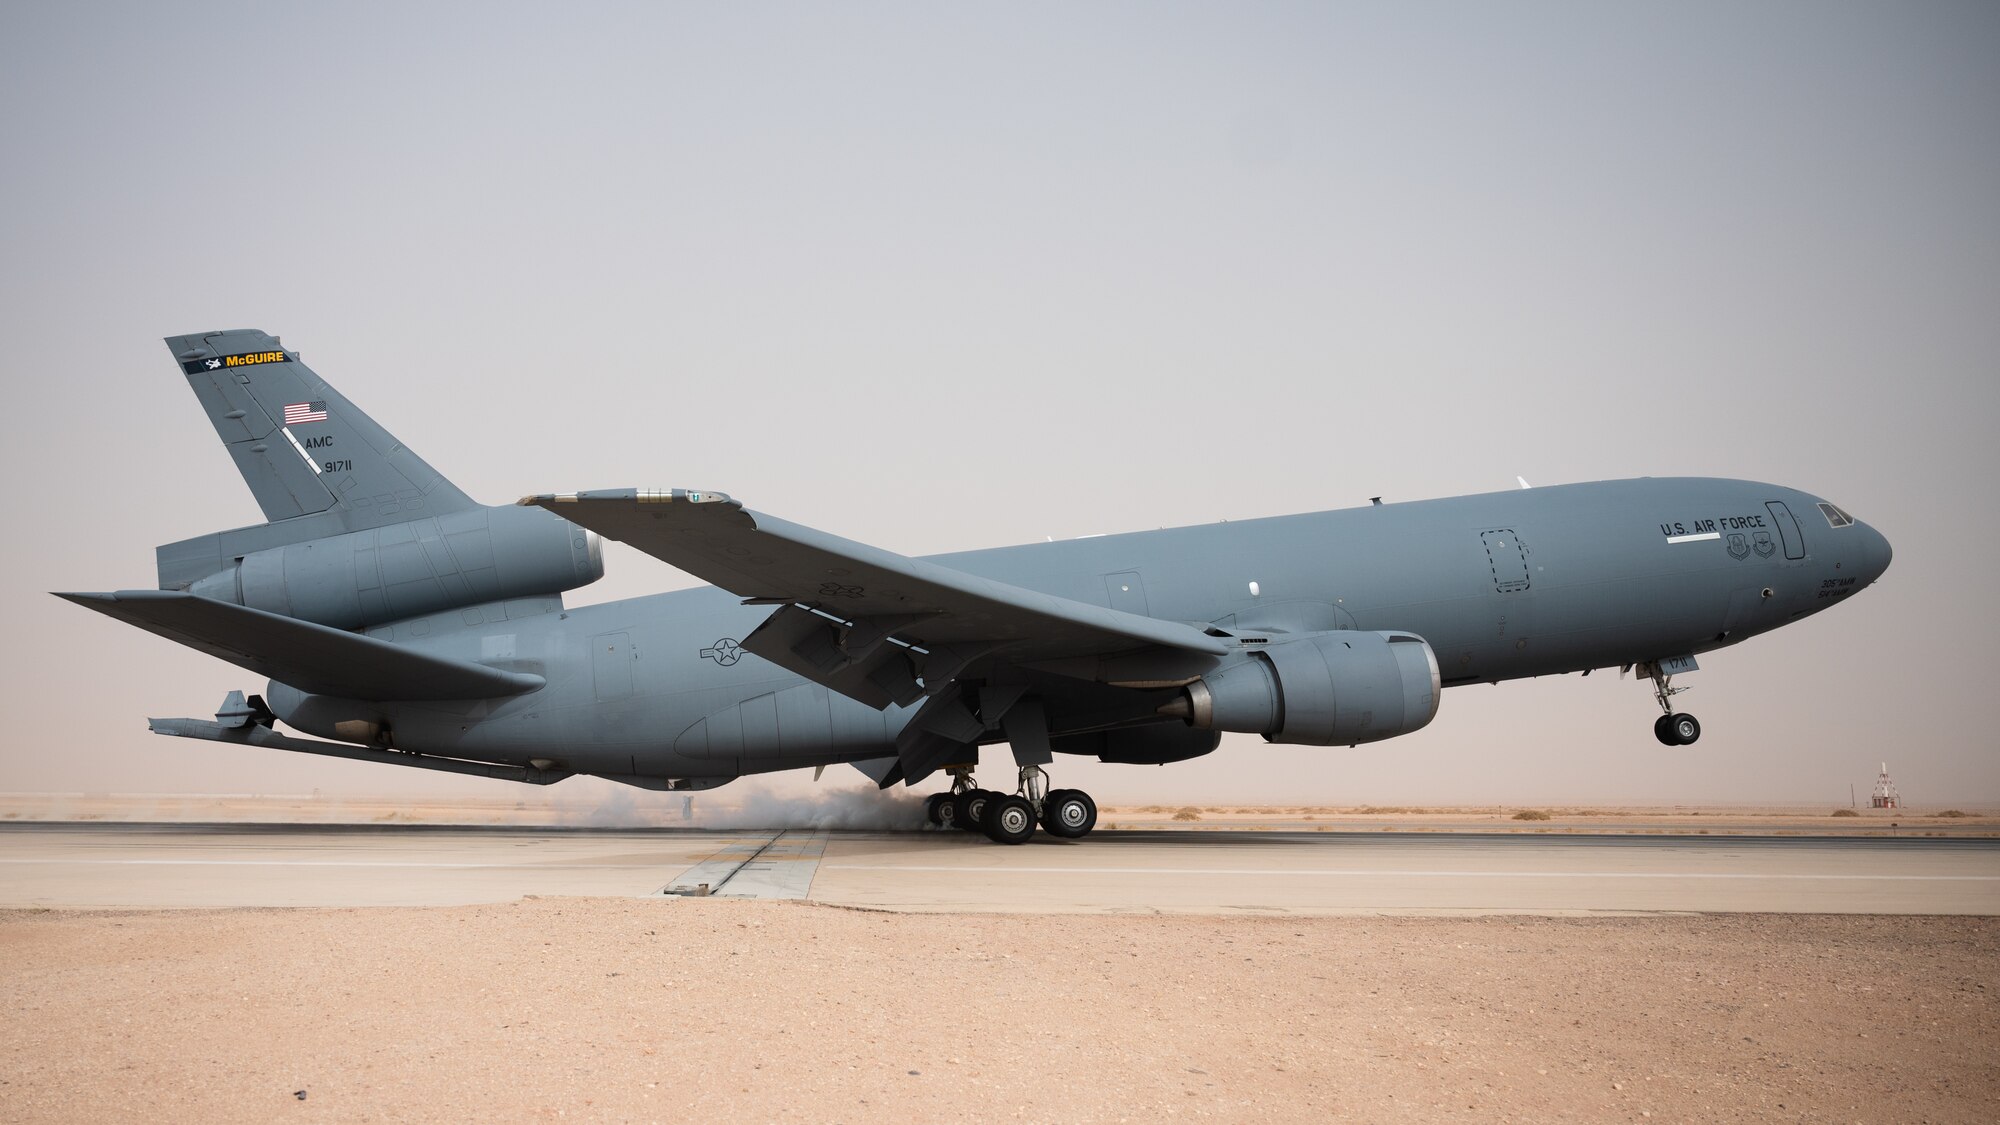 A U.S. Air Force KC-10 Extender assigned to the 908th Expeditionary Air Refueling Squadron lands at Prince Sultan Air Base, Kingdom of Saudi Arabia, March 6, 2022. The KC-10 is an advanced tanker and cargo aircraft designed to provide increased global mobility for U.S. armed forces. (U.S. Air Force photo by Senior Airman Jacob B. Wrightsman)